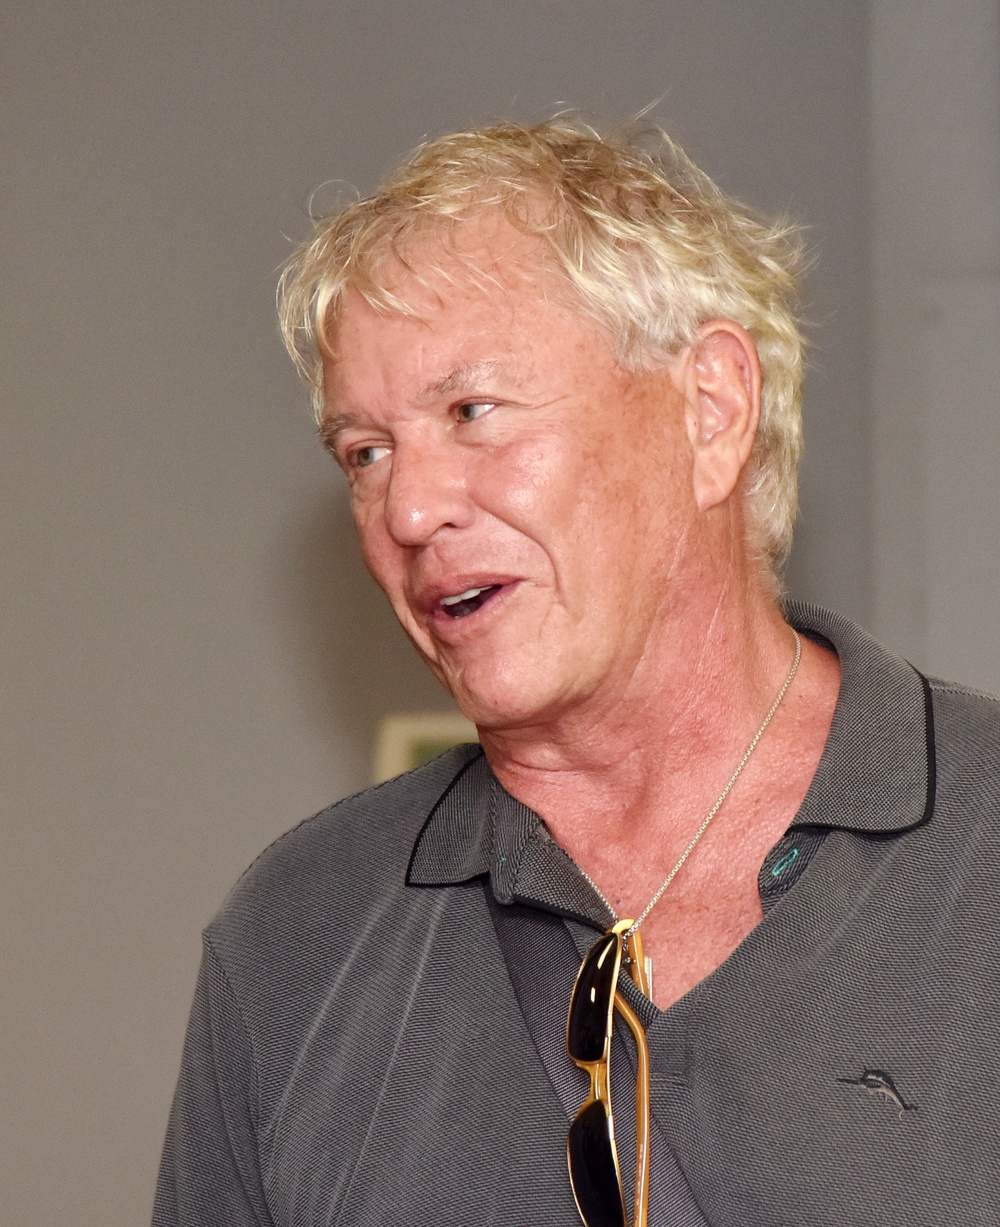 Actor Tom Berenger at NAS Key West for Thanksgiving